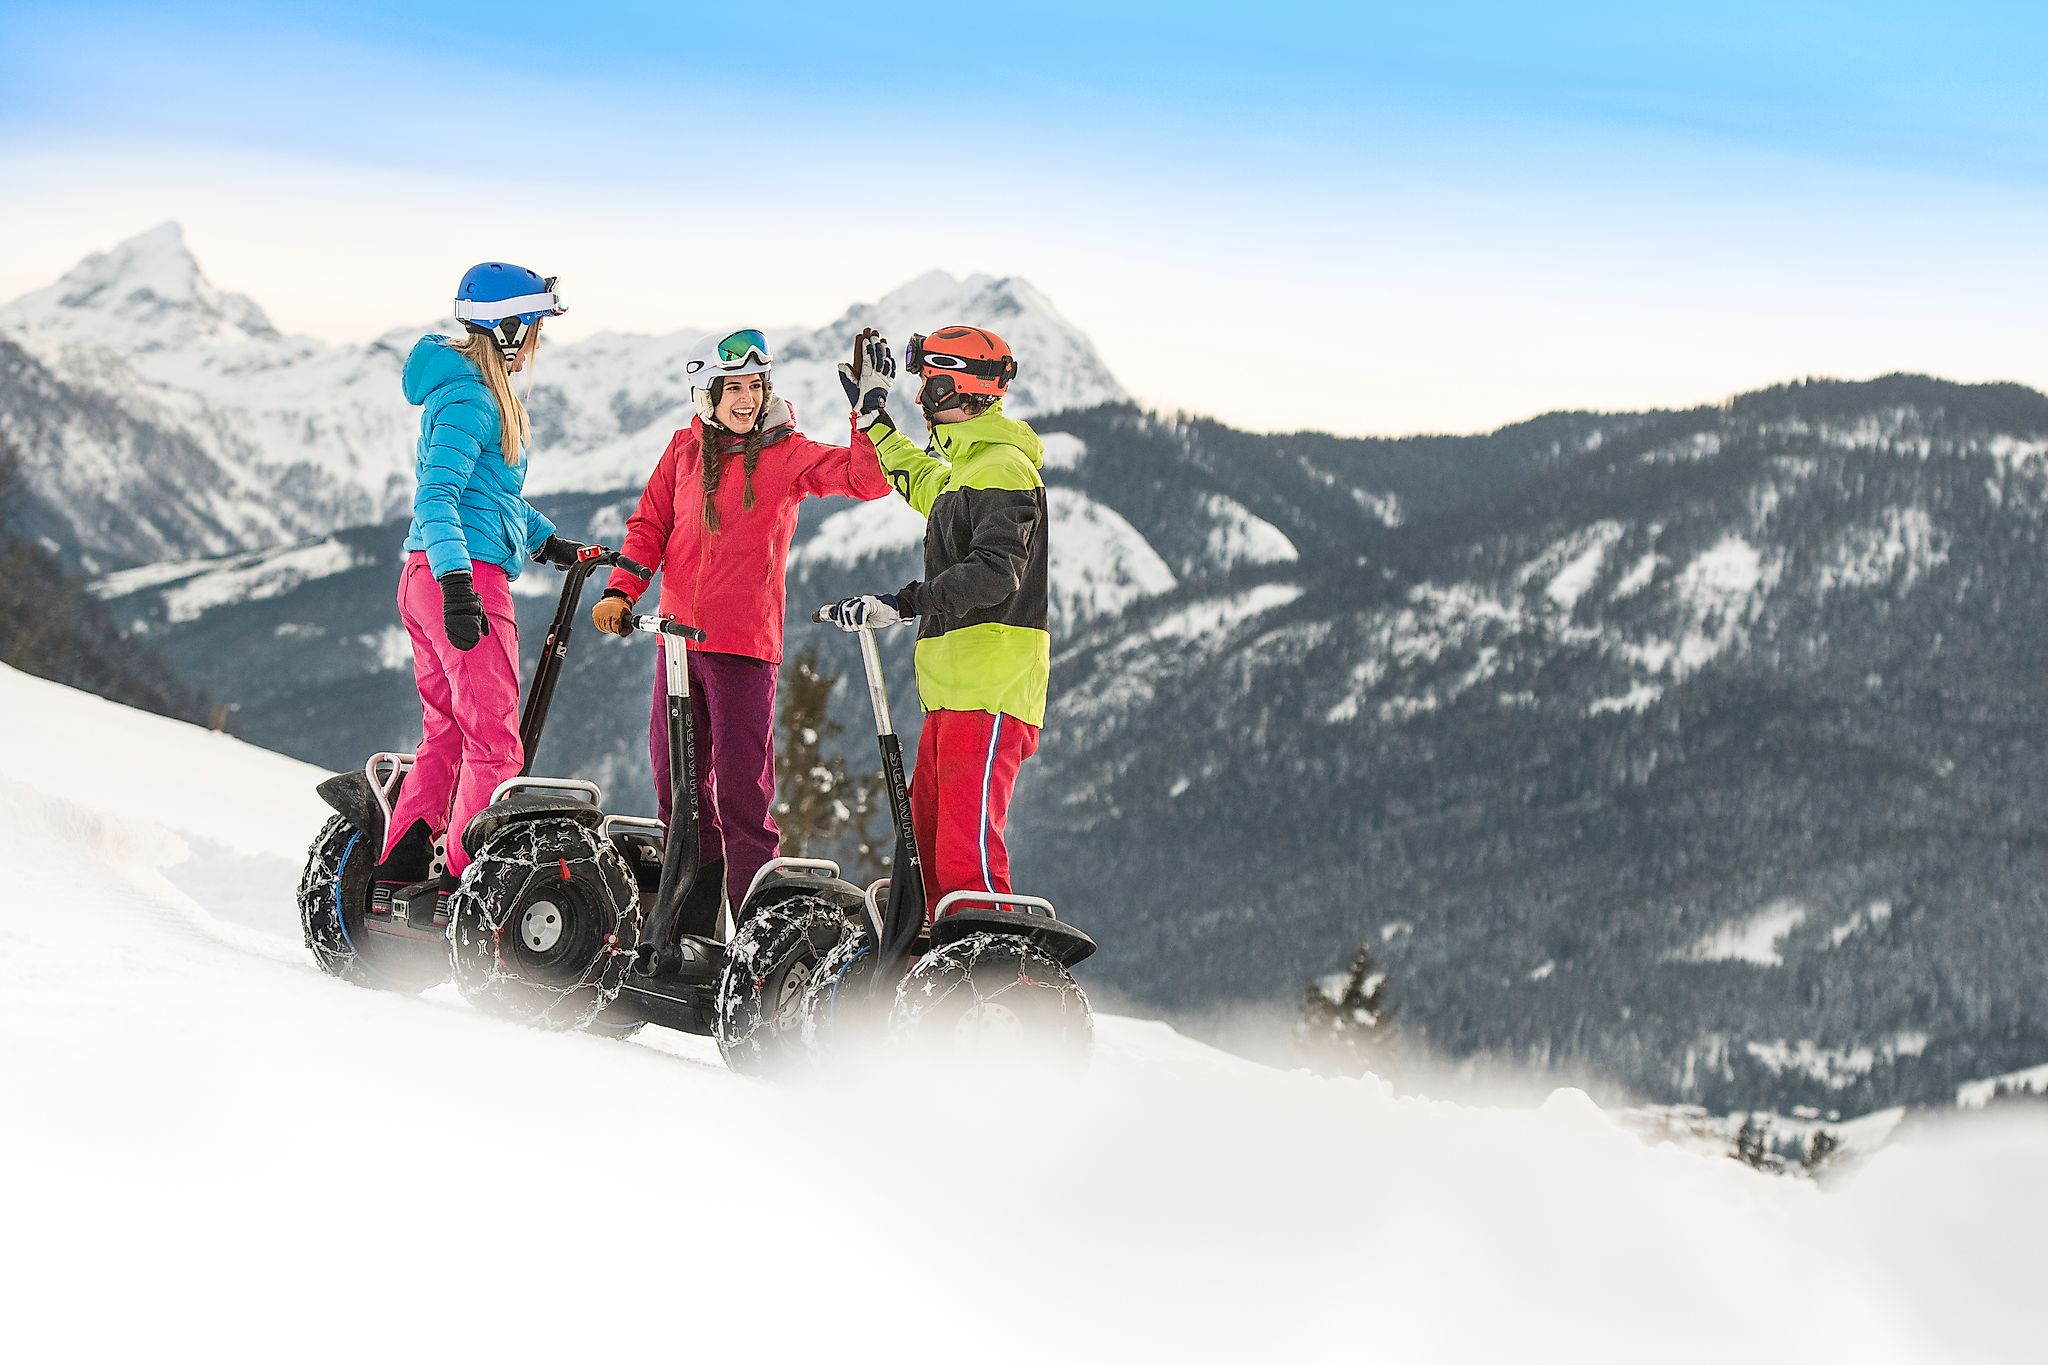 <p>A fun Segway tour through the snowy winter landscape provides variety in the winter vacation.</p>